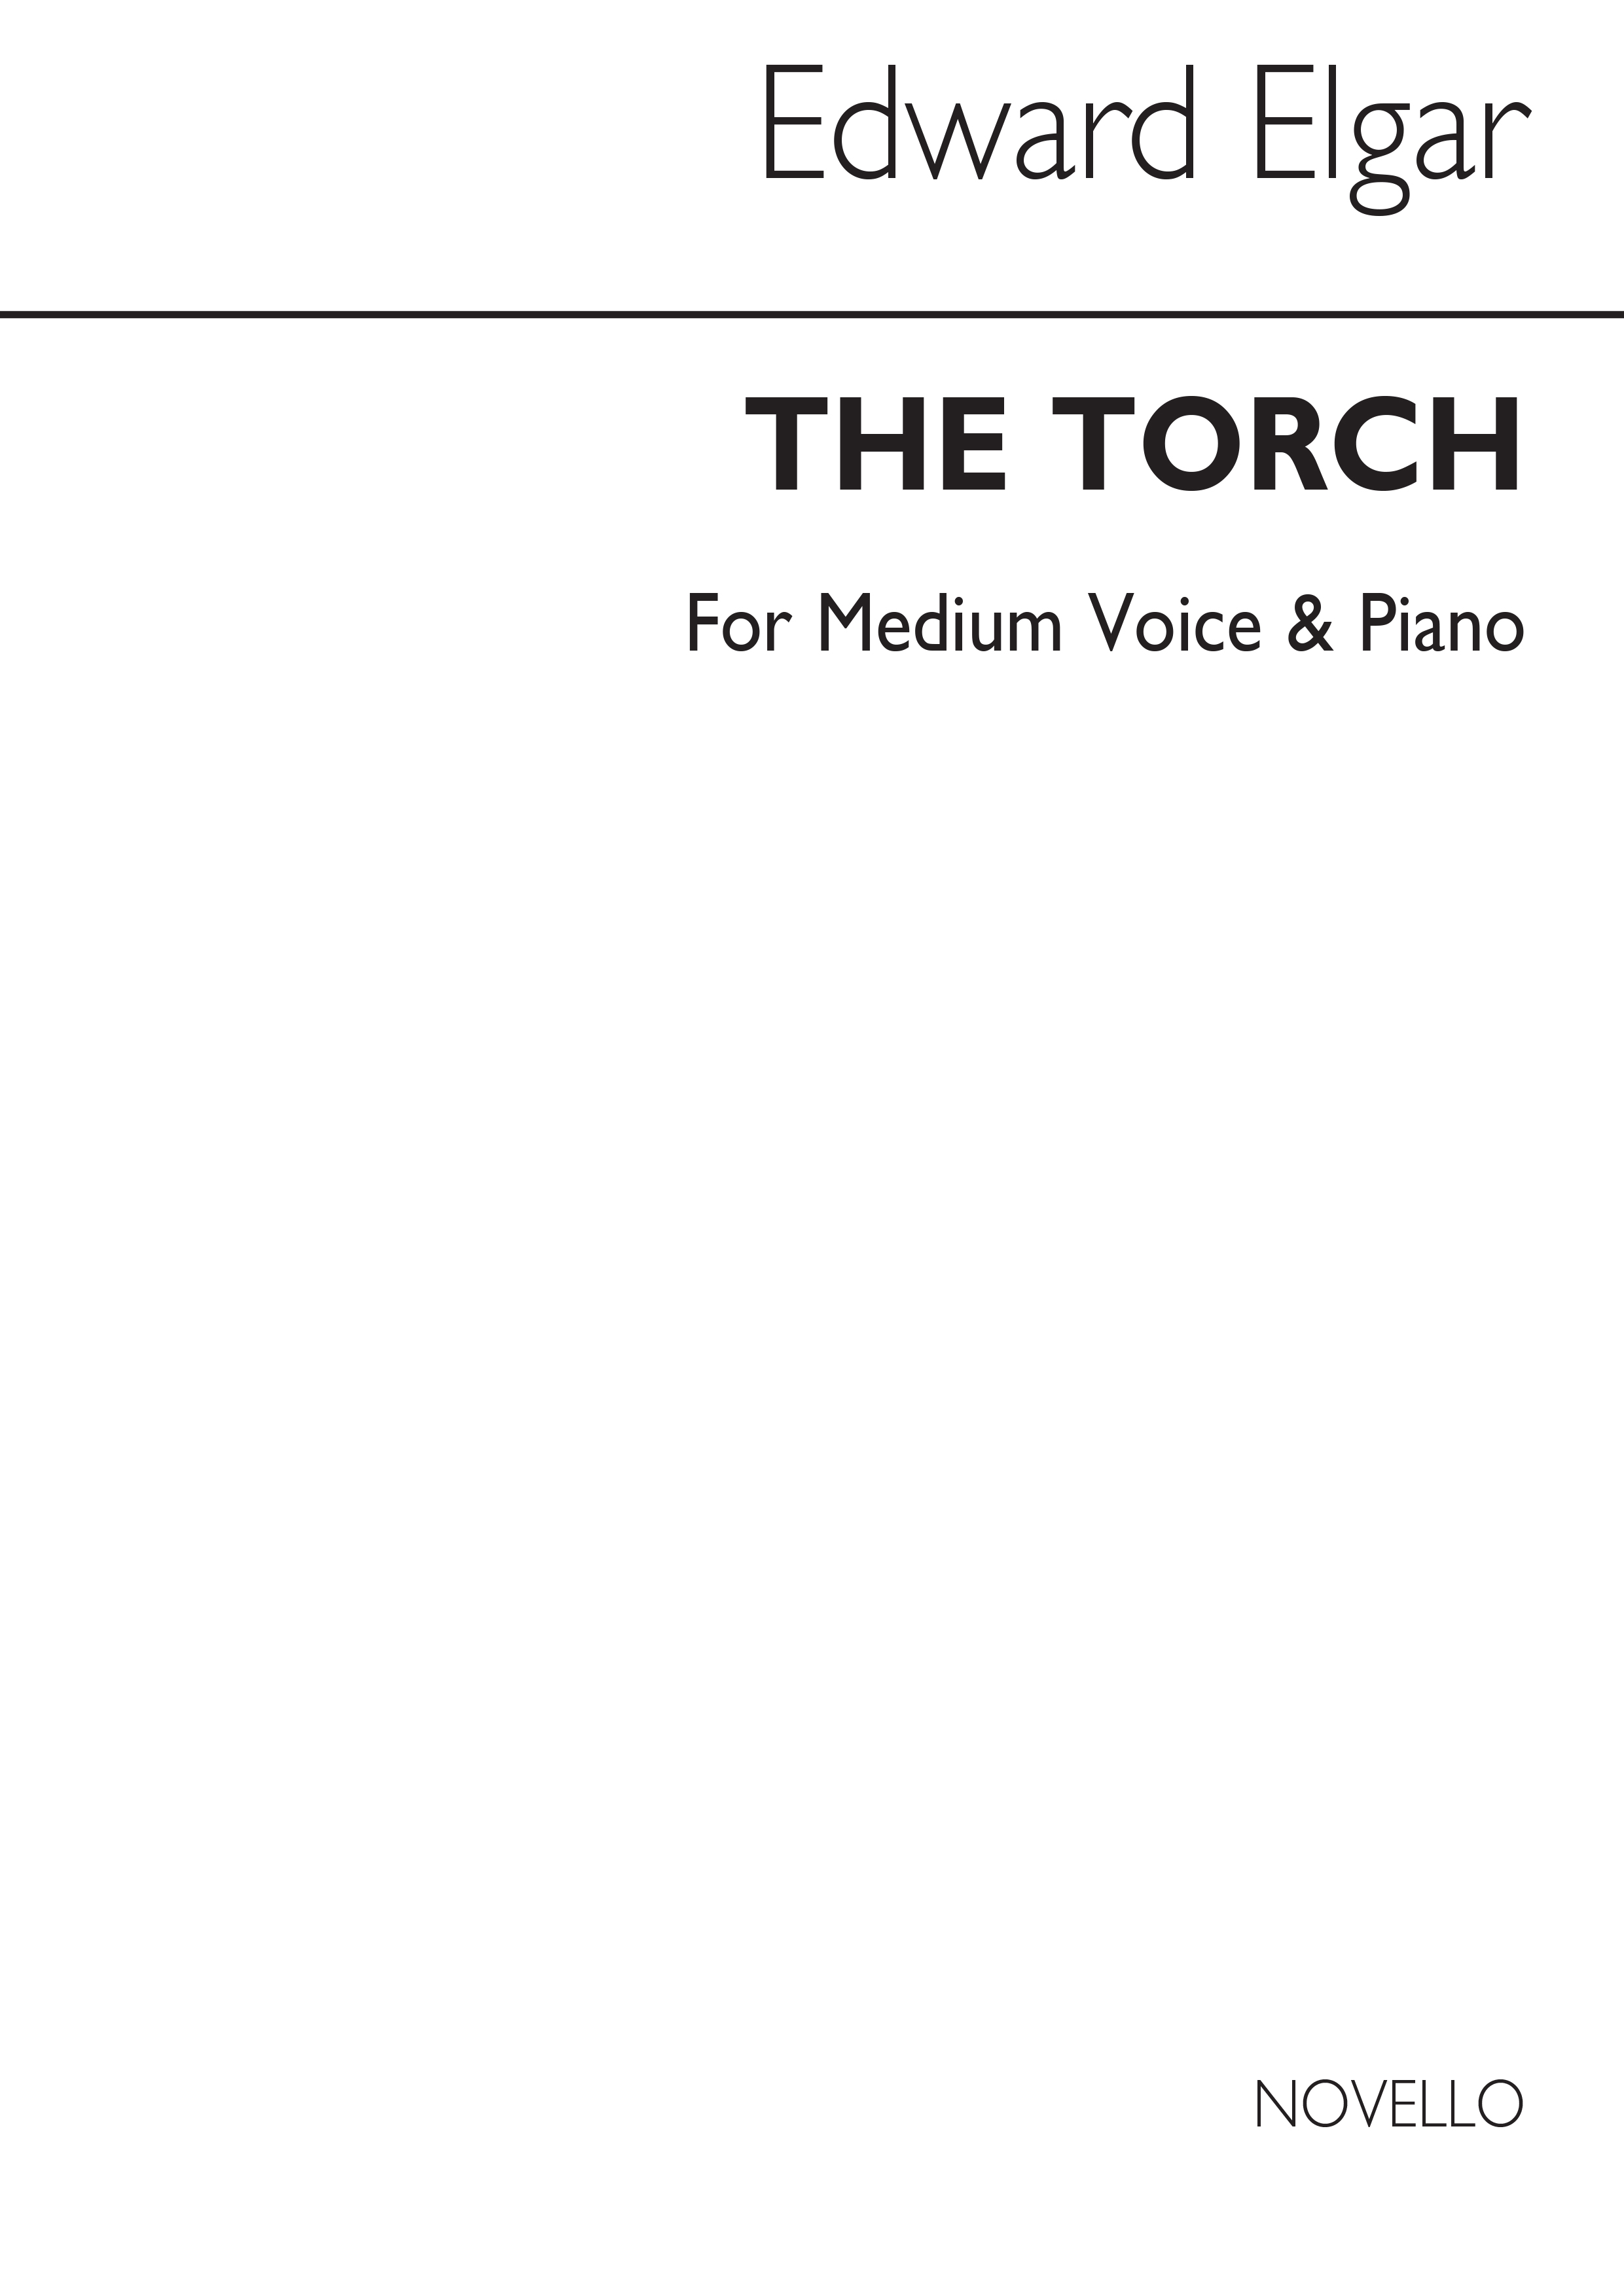 Elgar: Torch In G for Medium Voice and Piano